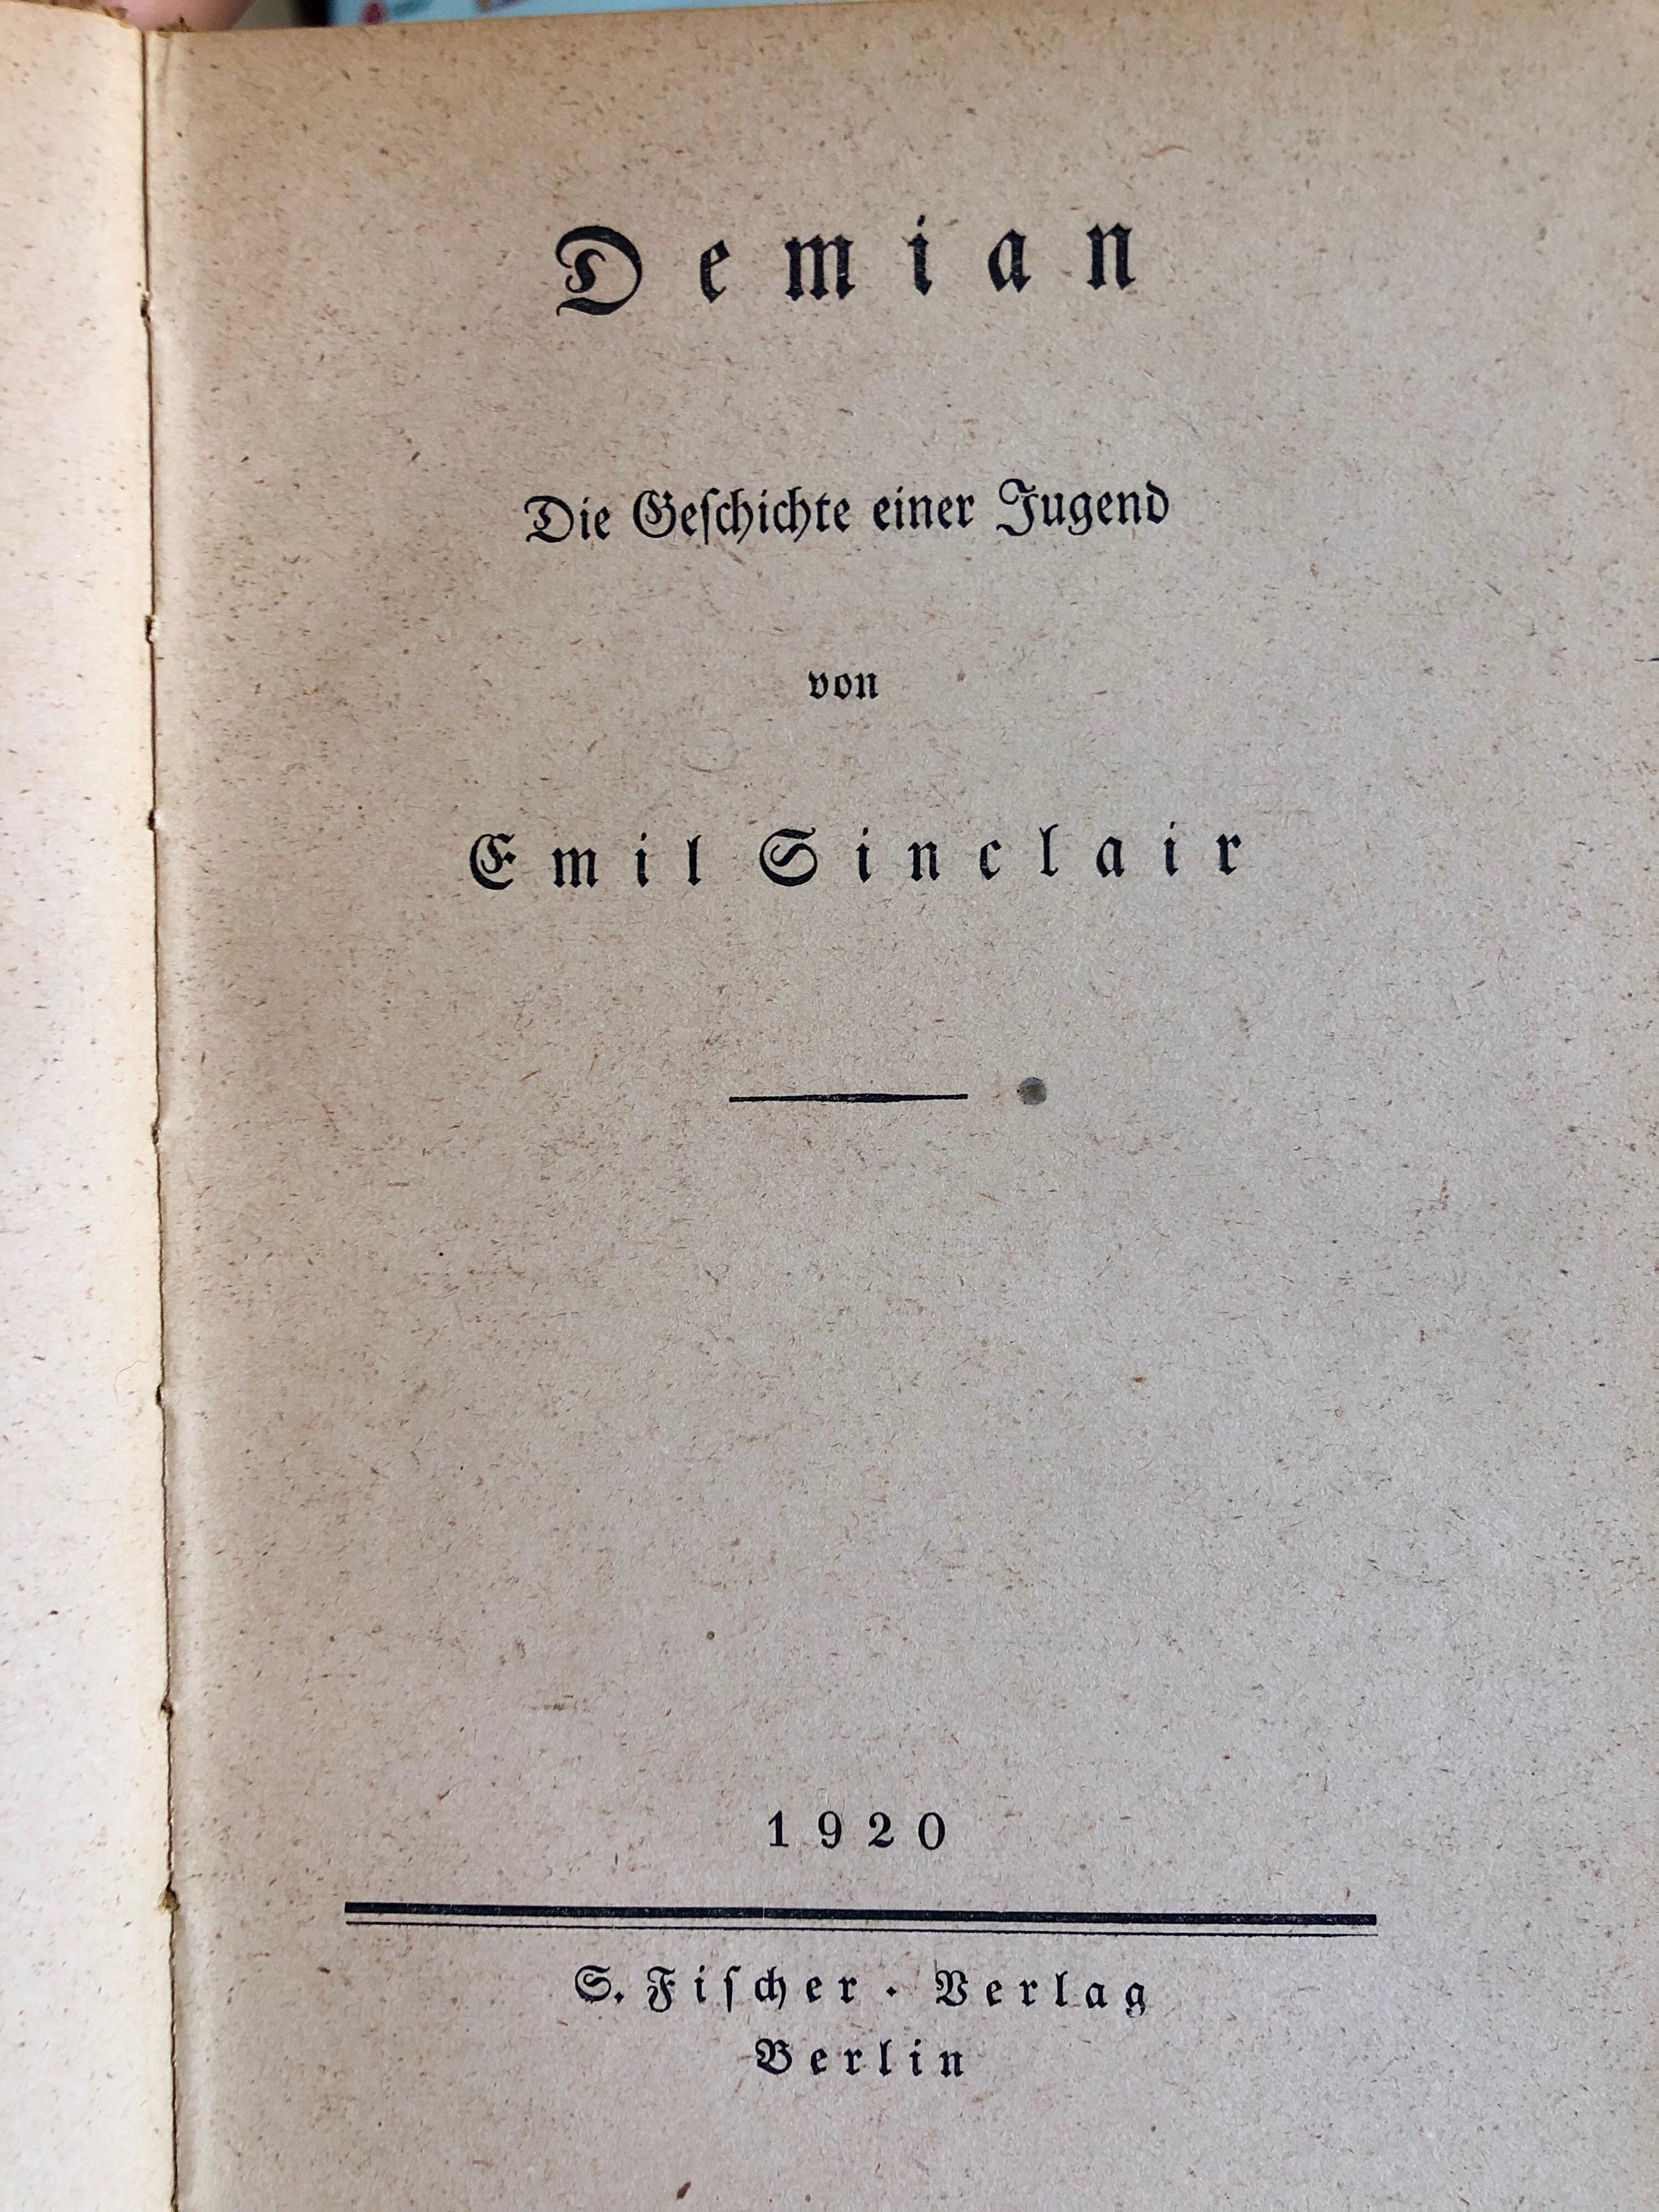 Demian: The Story of Emil Sinclair's Youth 
Berlin: S. Fischer Verlag, 1919.
Sinclair, Emil [pseudonym of Hermann Hesse]
Demian: The Story of Emil Sinclair's Youth is a Bildungsroman by Hermann Hesse, first published in 1919; a prologue was added